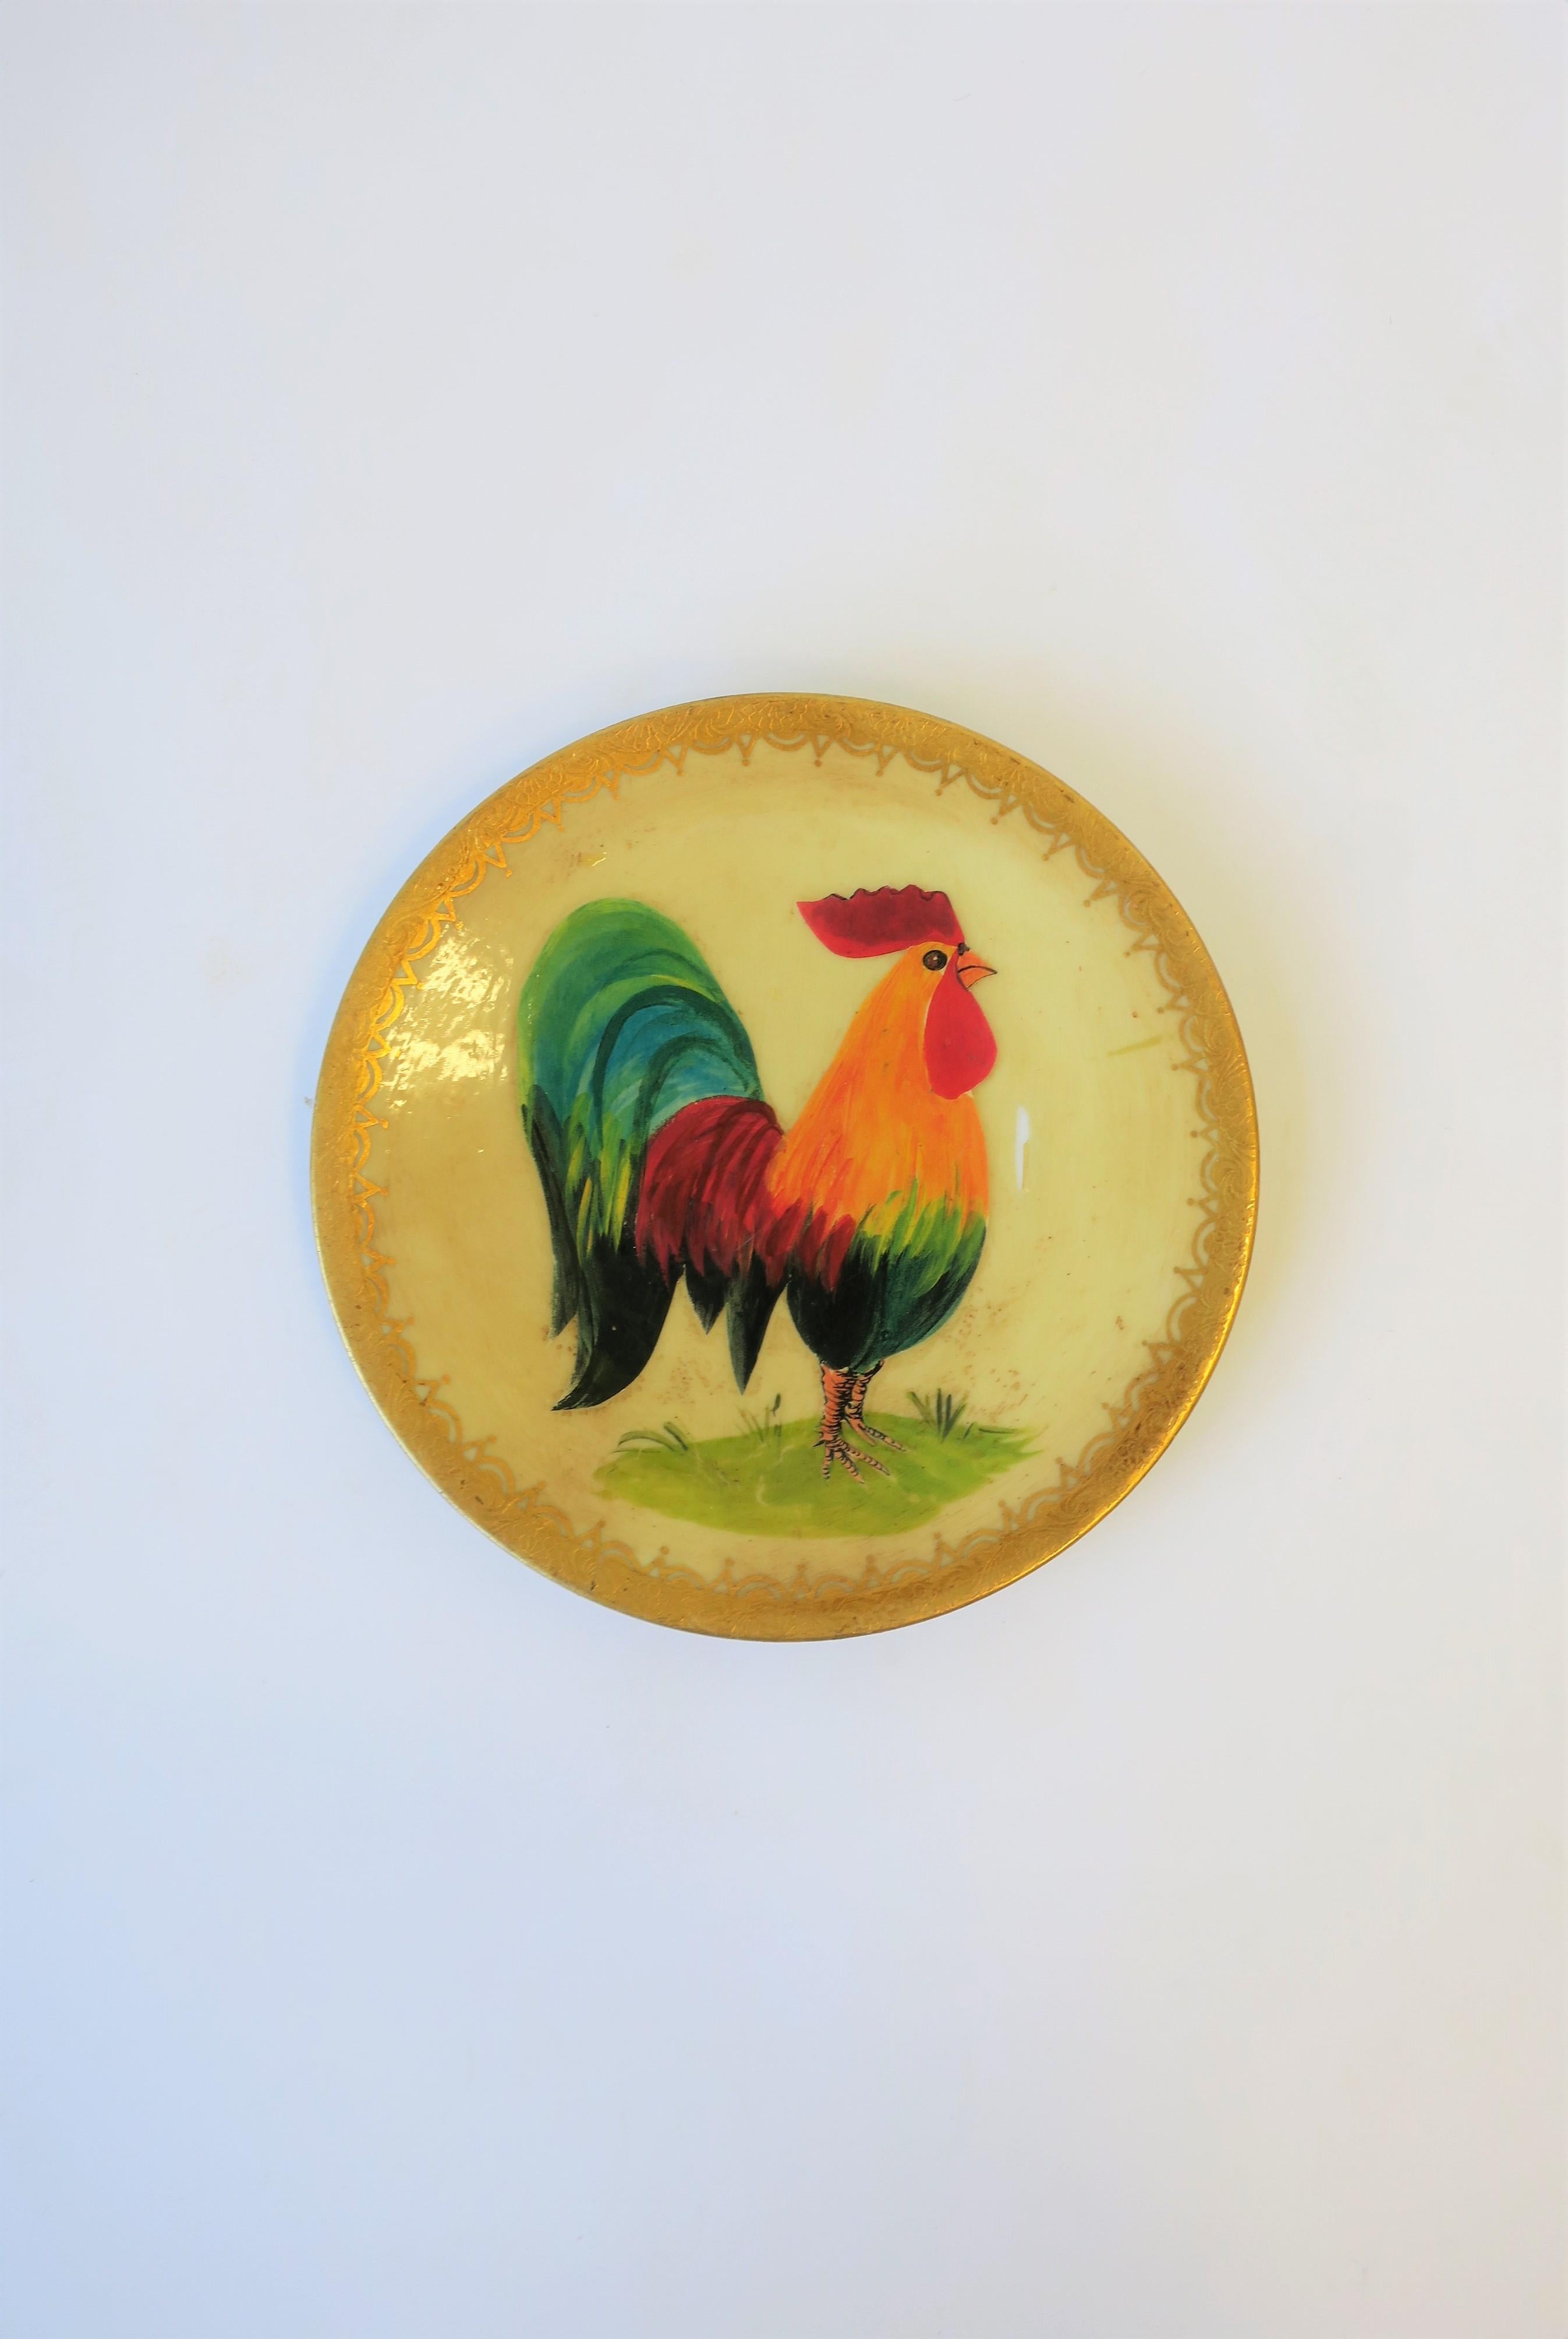 A beautiful French porcelain hand painted wall art plate with colorful Rooster bird and gold gilt edge by artist A.A. Rose, circa early 20th century, France. Plate bears maker's mark and artist signature on back: Artist 